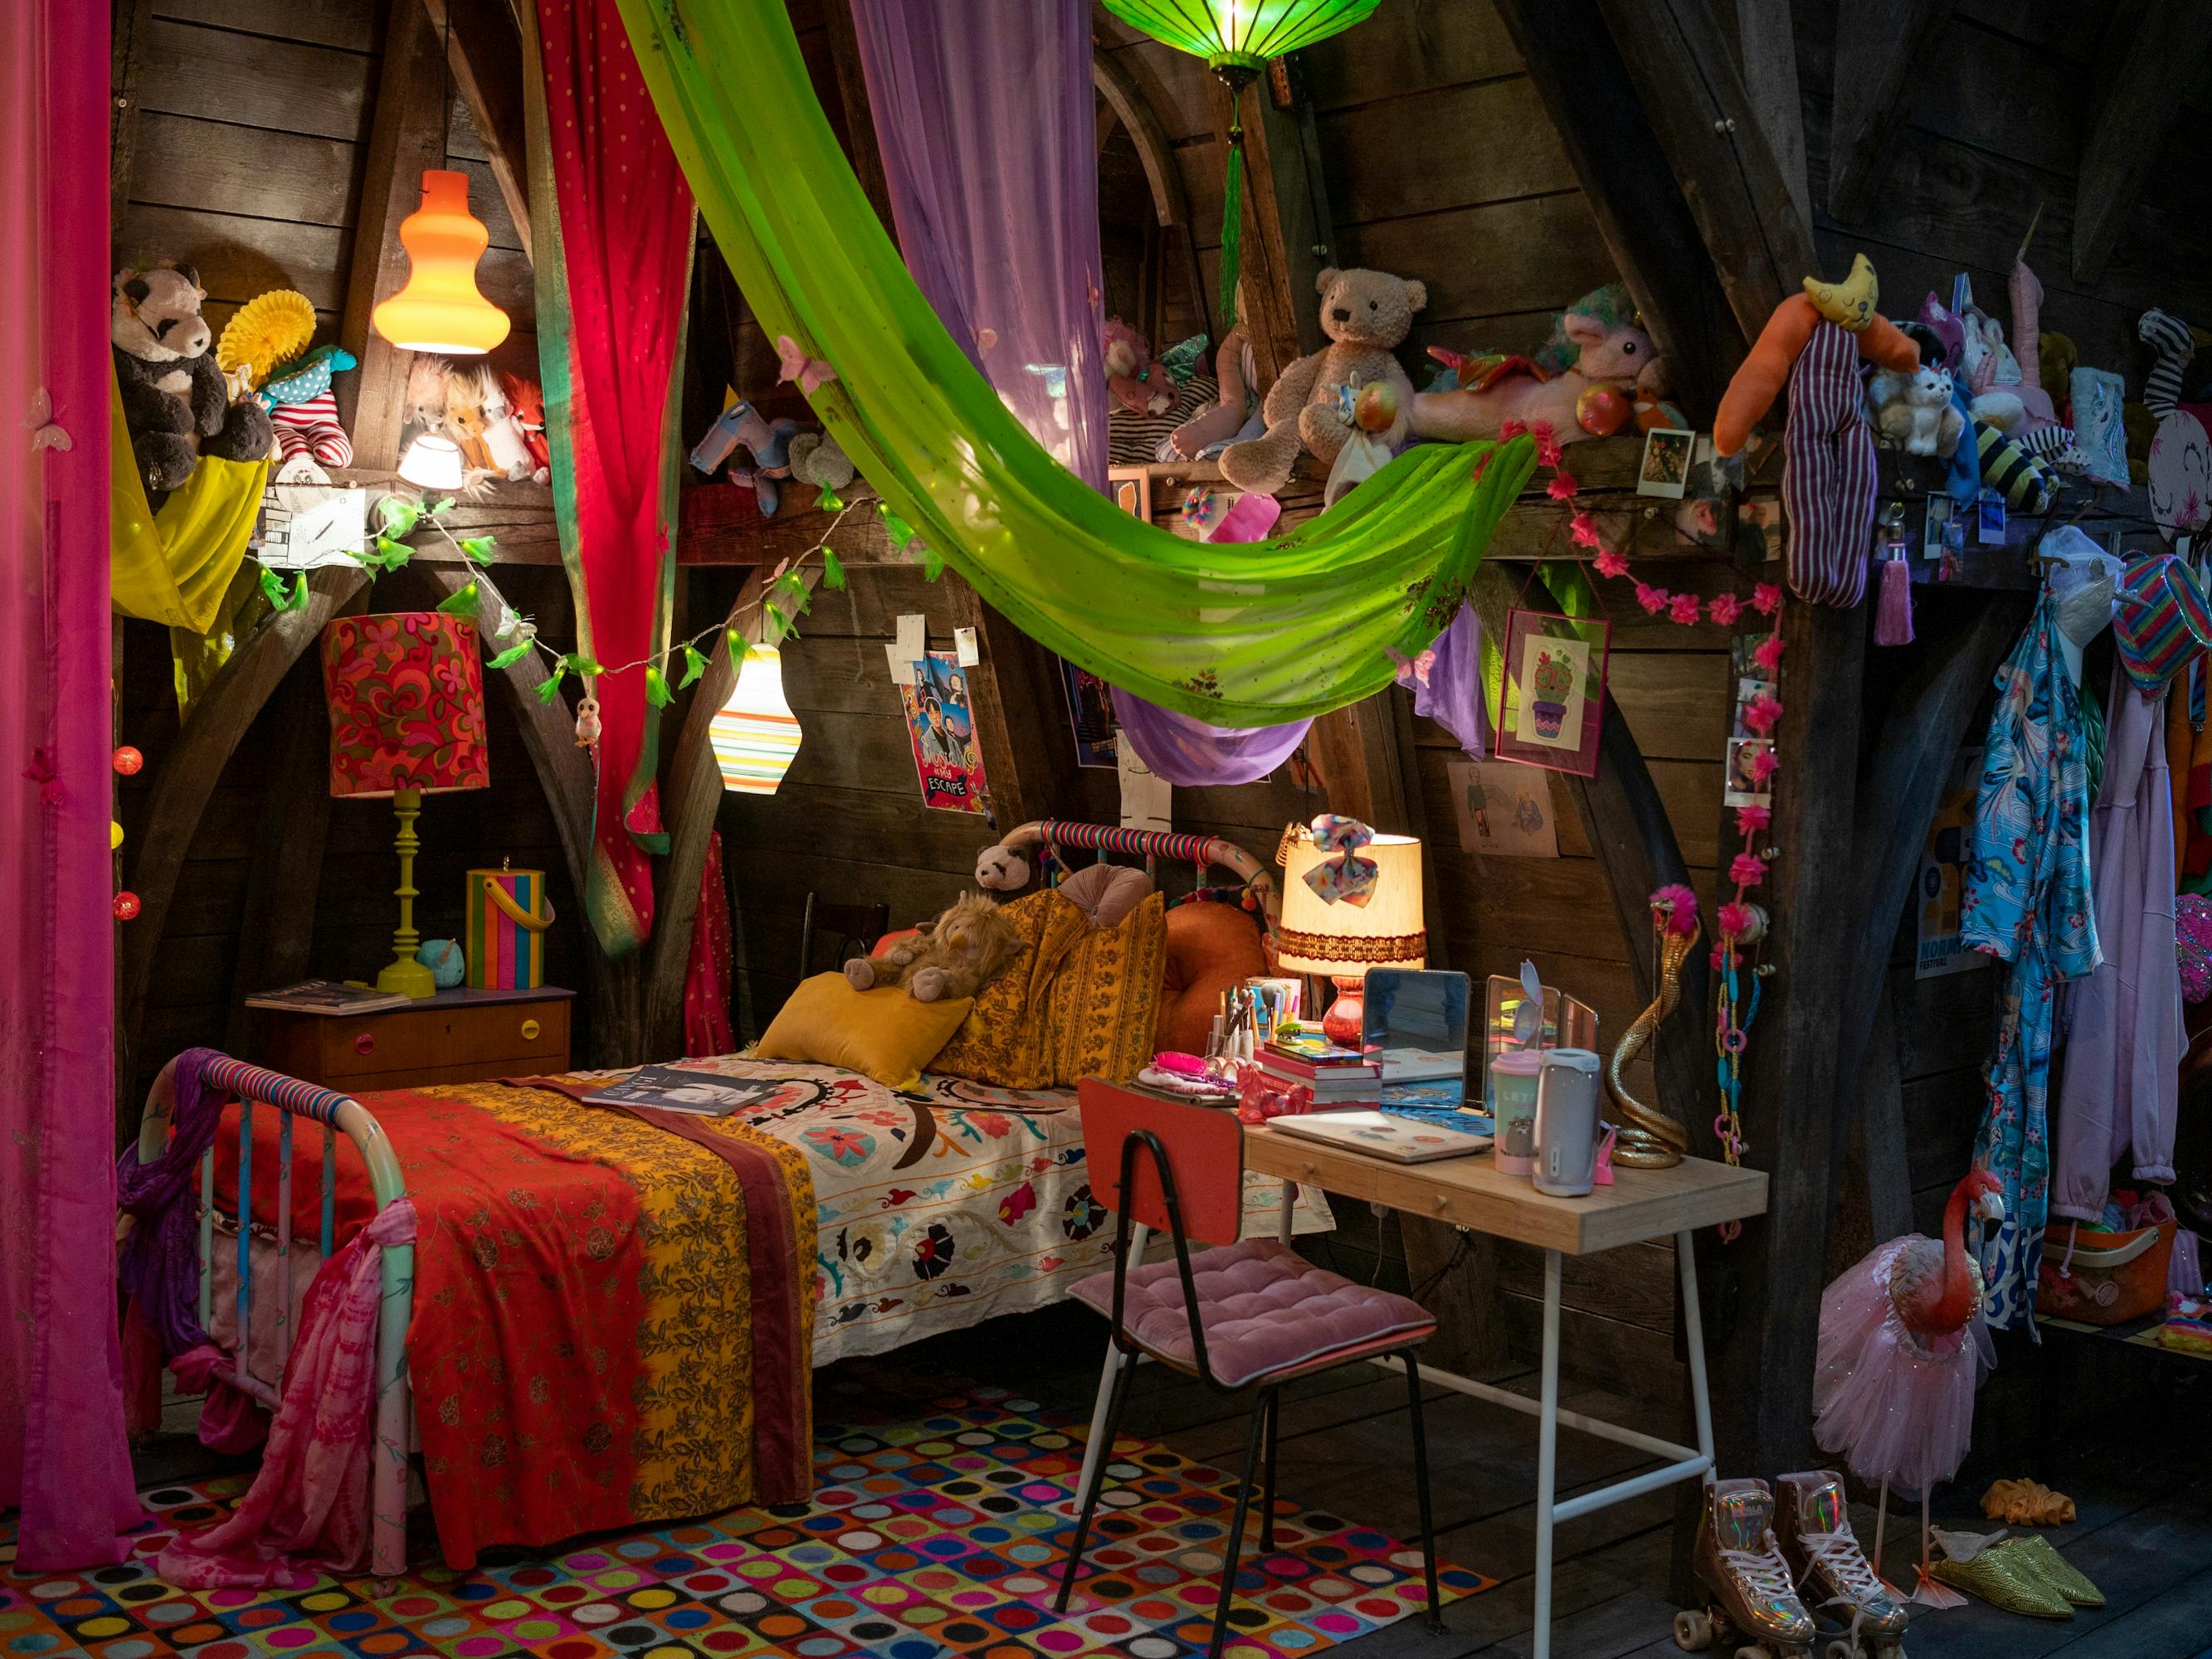 Enid Sinclair's (Emma Myers) side of the room. There is a multicolored rug, a green-pink-and-purple awning, lots of colorful clothes, trinkets and knick knacks, and a colorful quilt atop a cozy-looking bed.